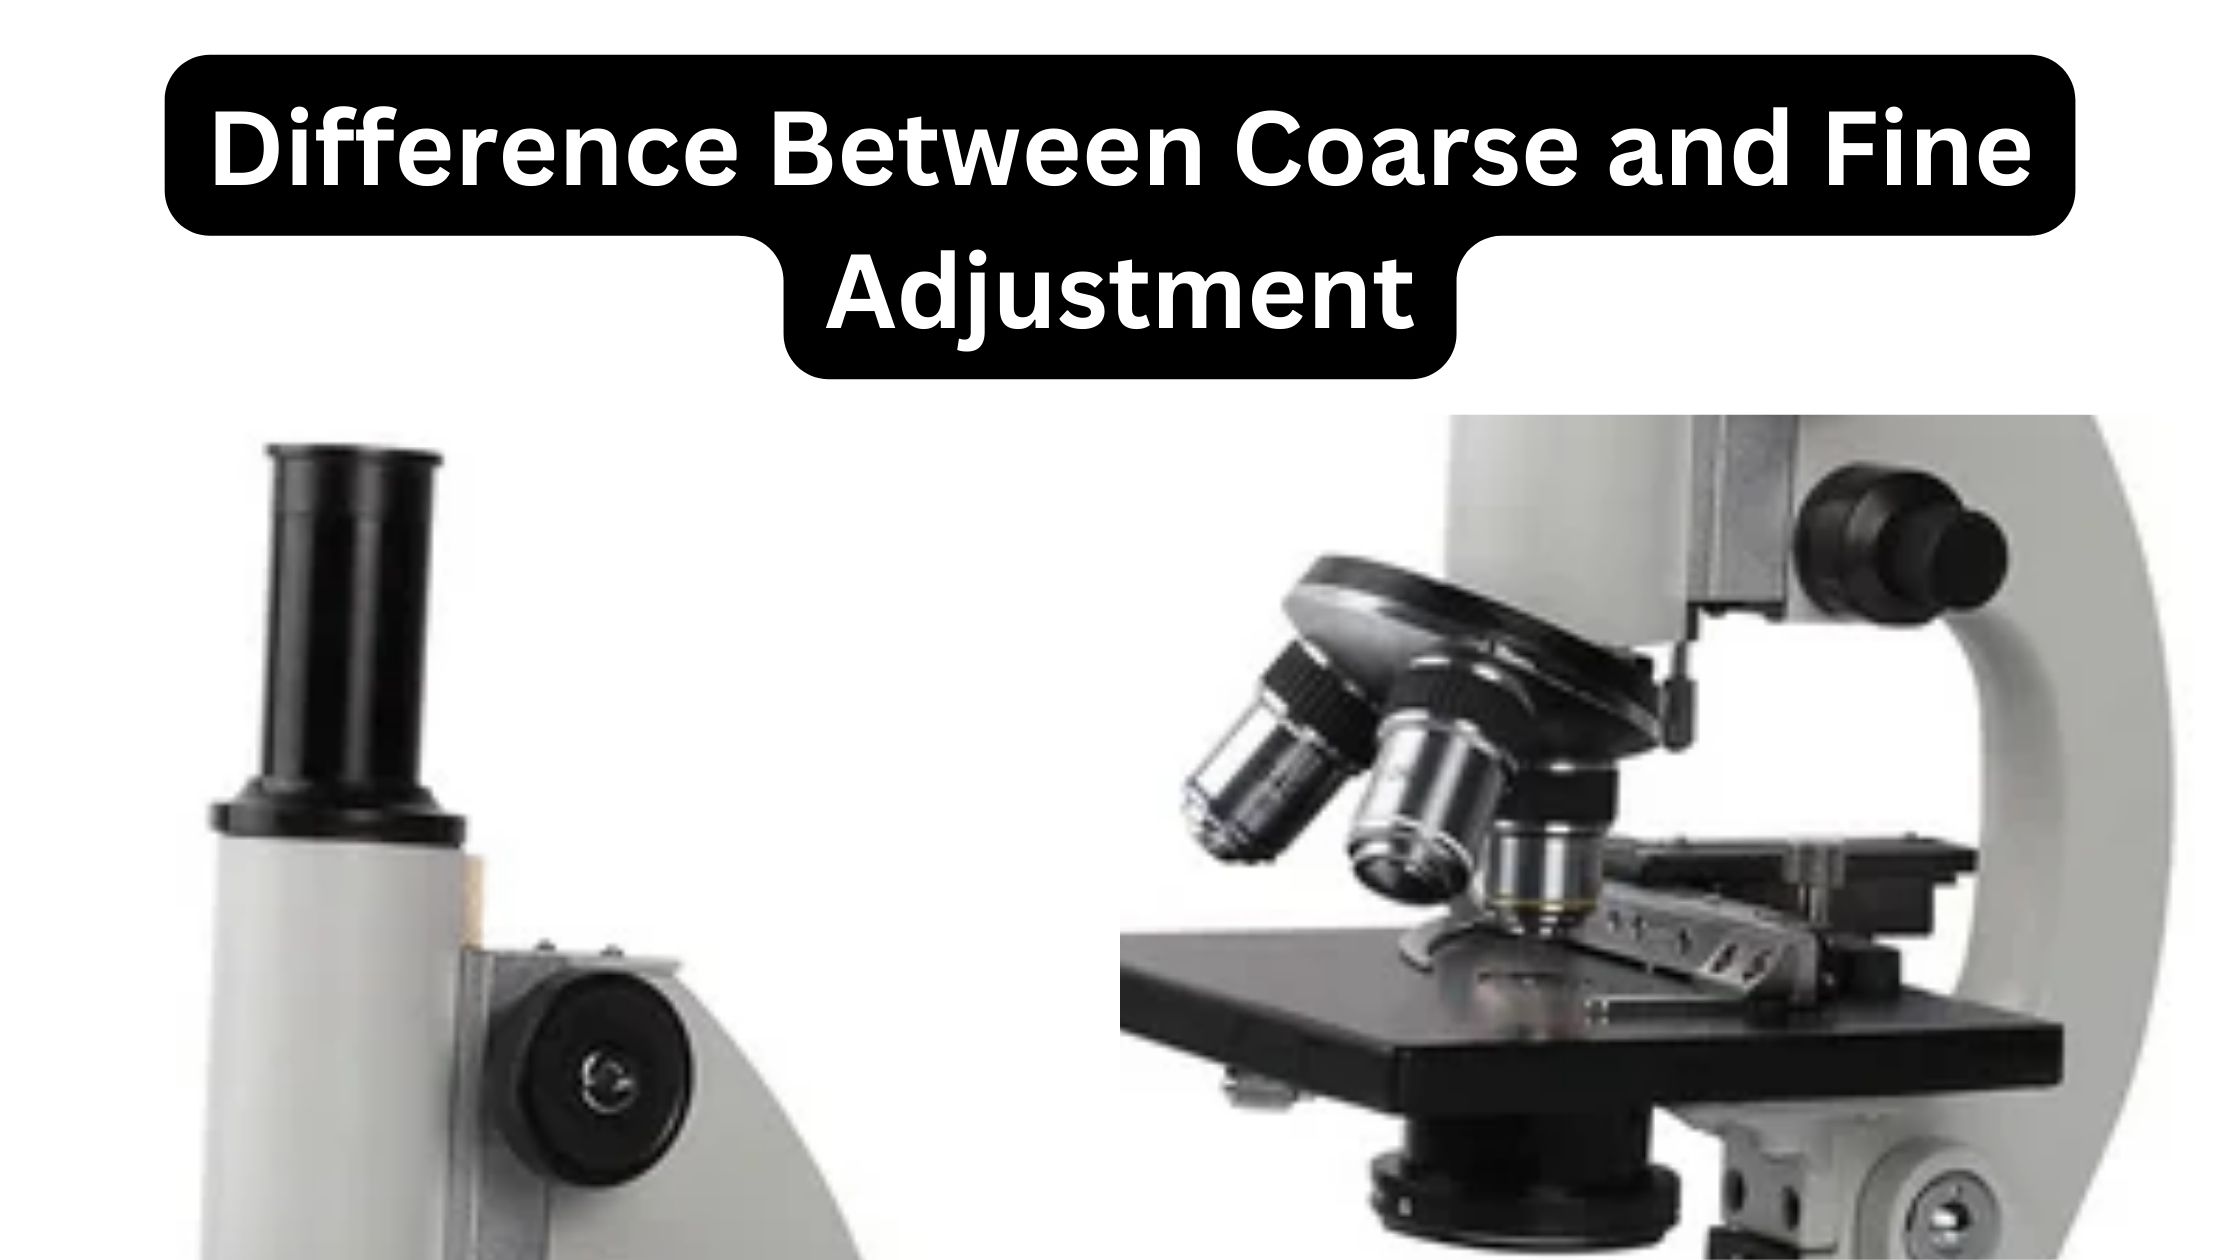 Difference Between Coarse and Fine Adjustment